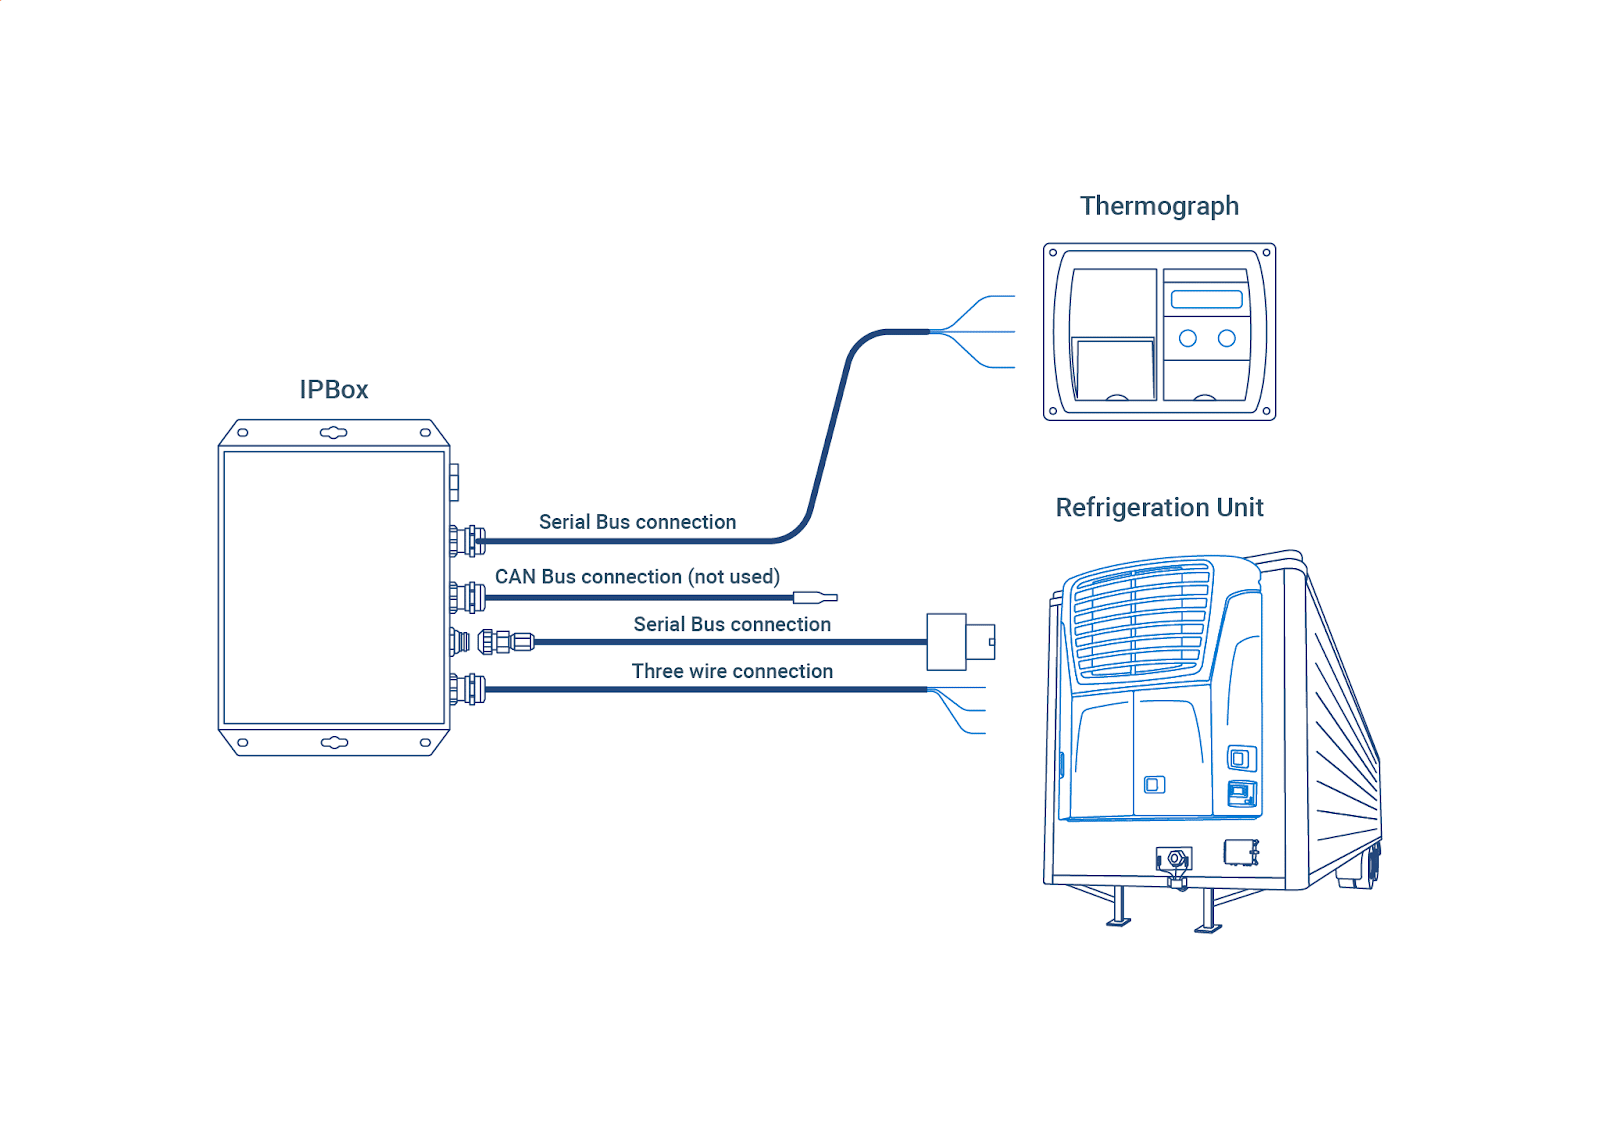 Diagram of connection between IP box, thermograph, and refrigeration unit with RS232 protocol